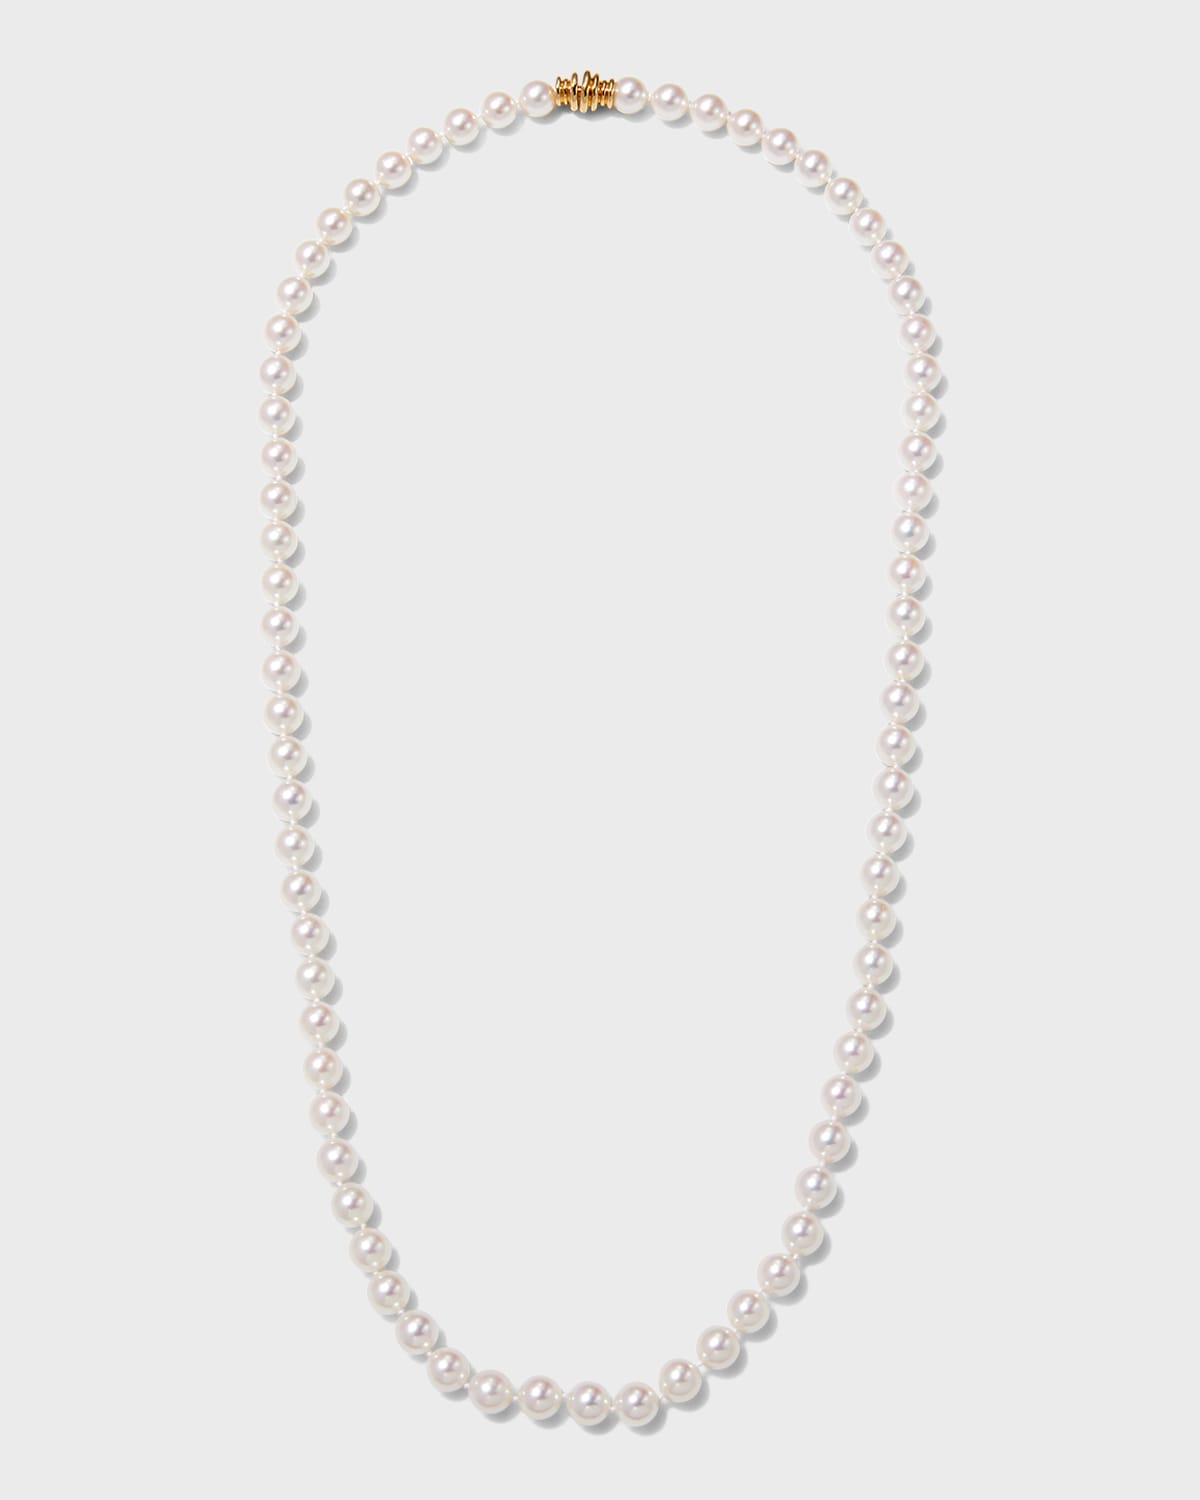 Assael 26" Akoya Cultured 8.5mm Pearl Necklace with Yellow Gold Clasp